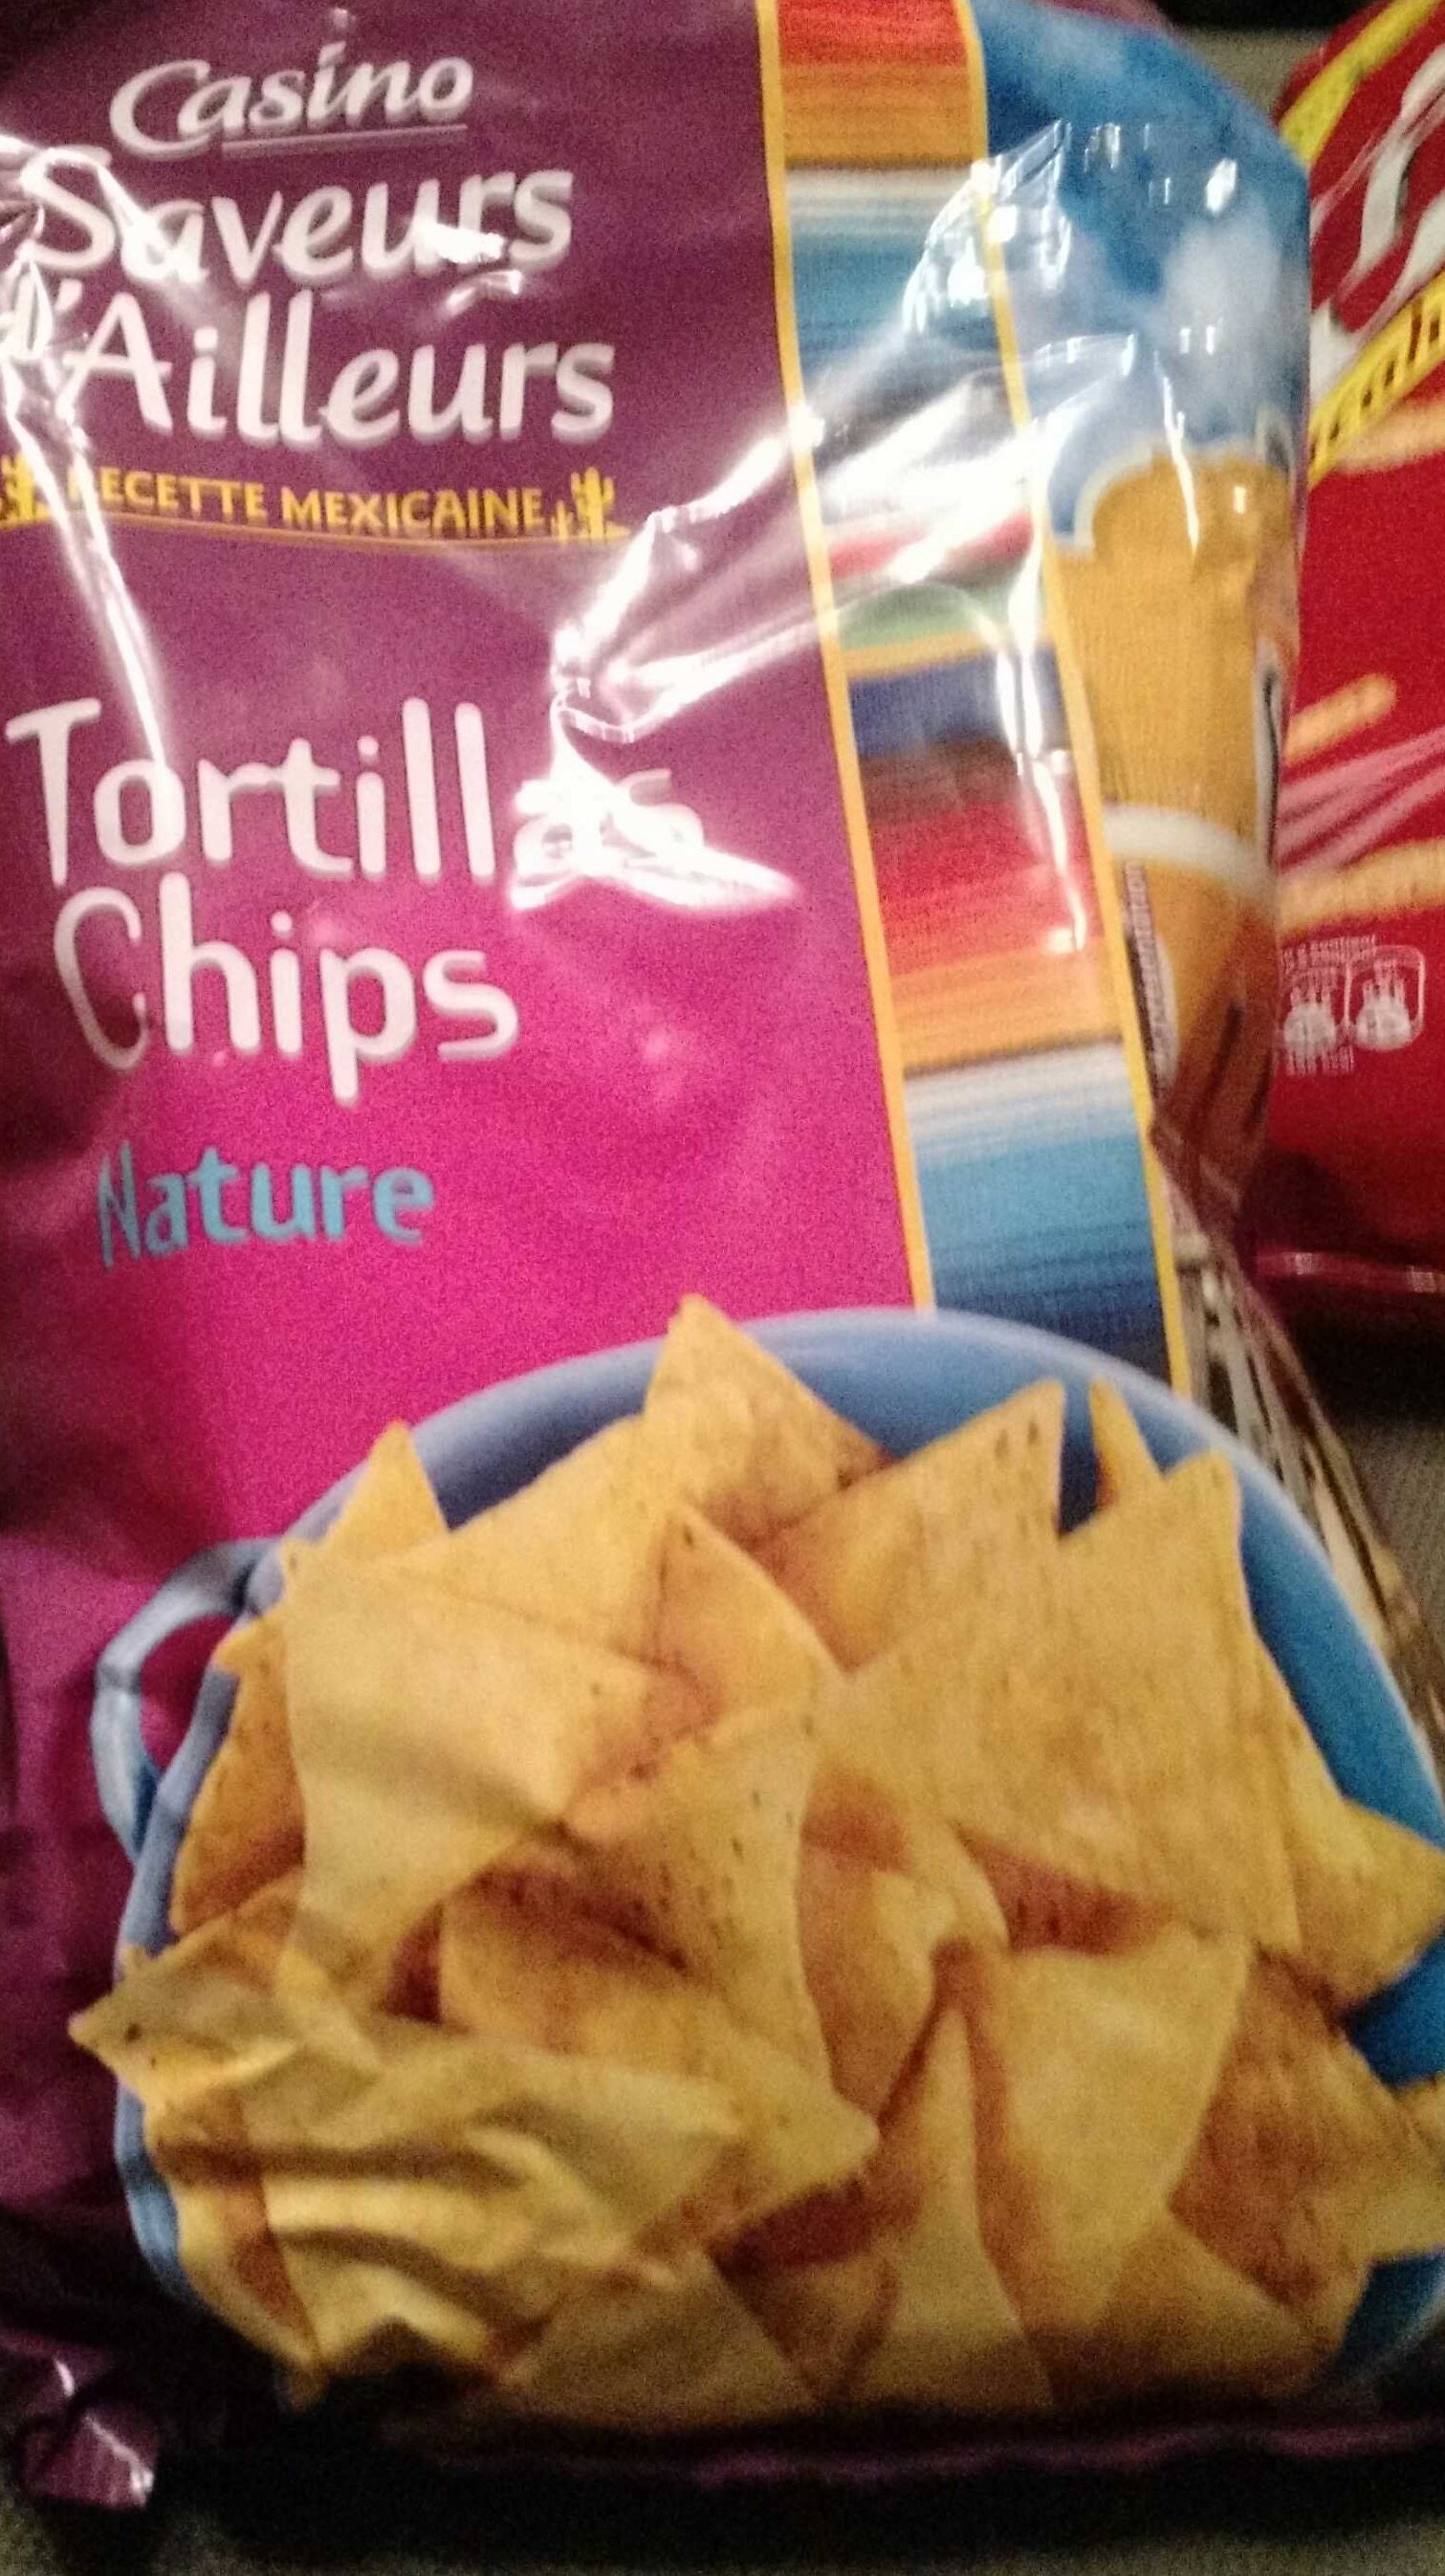 Tortilla chips Nature Flavors from Elsewhere Casino 150 G x2